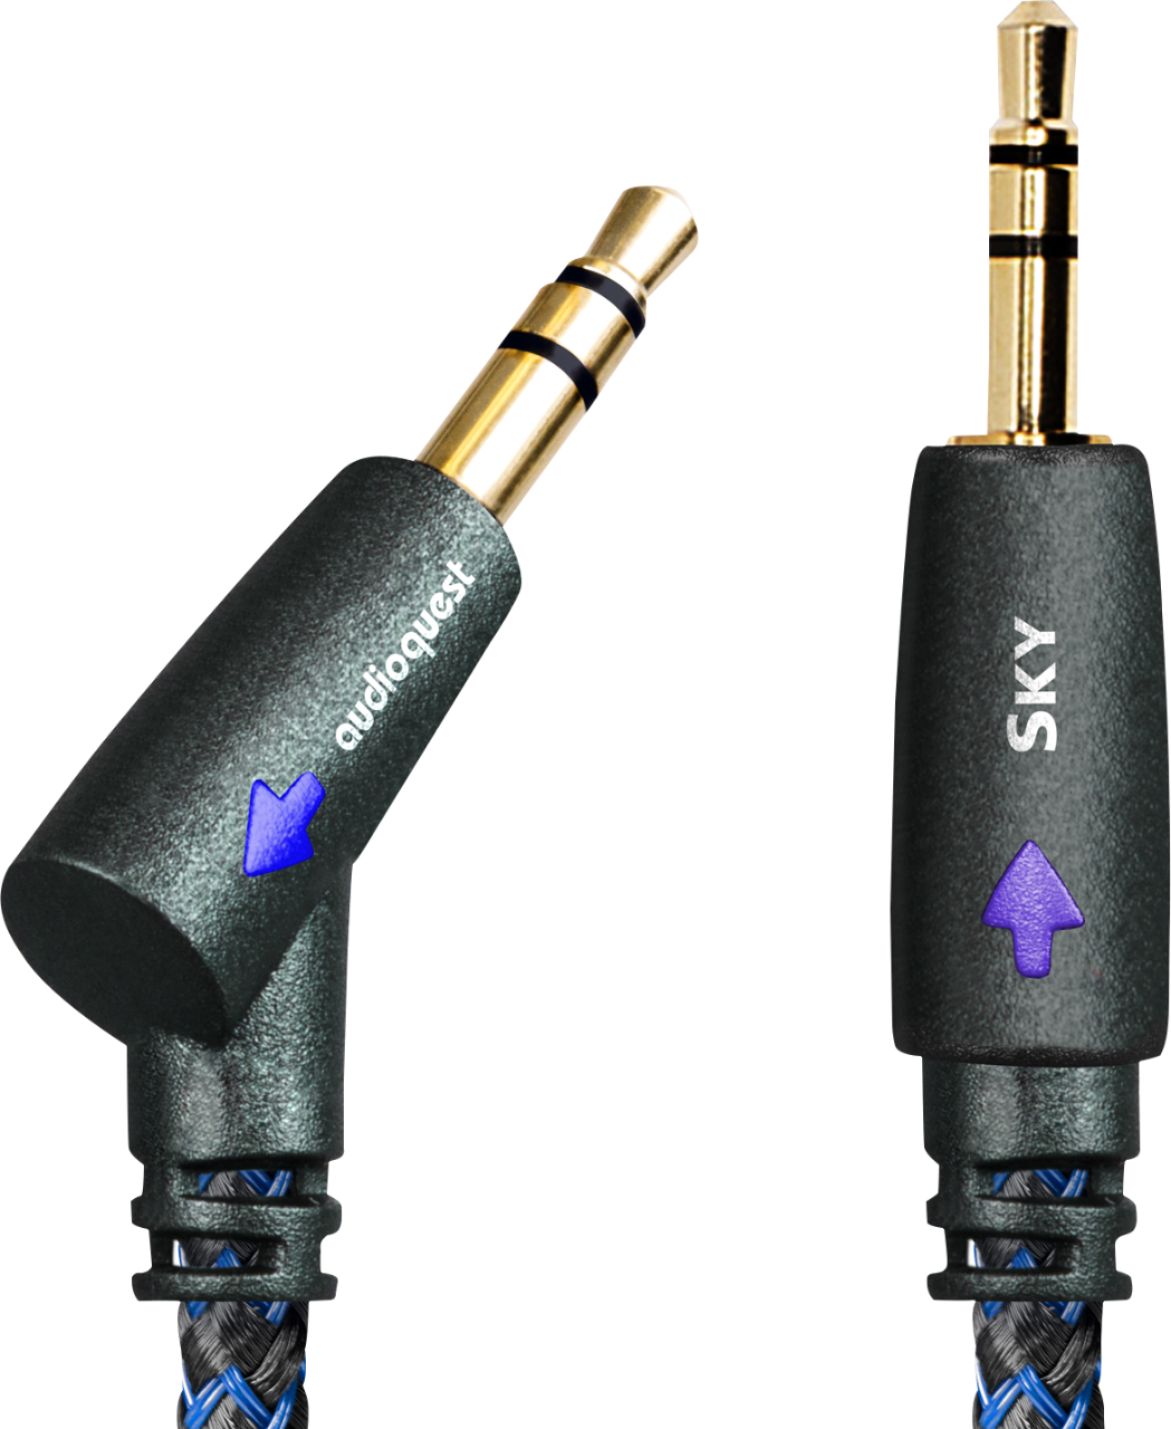 AudioQuest - Sky 4' Stereo Audio Cable - Black/Blue